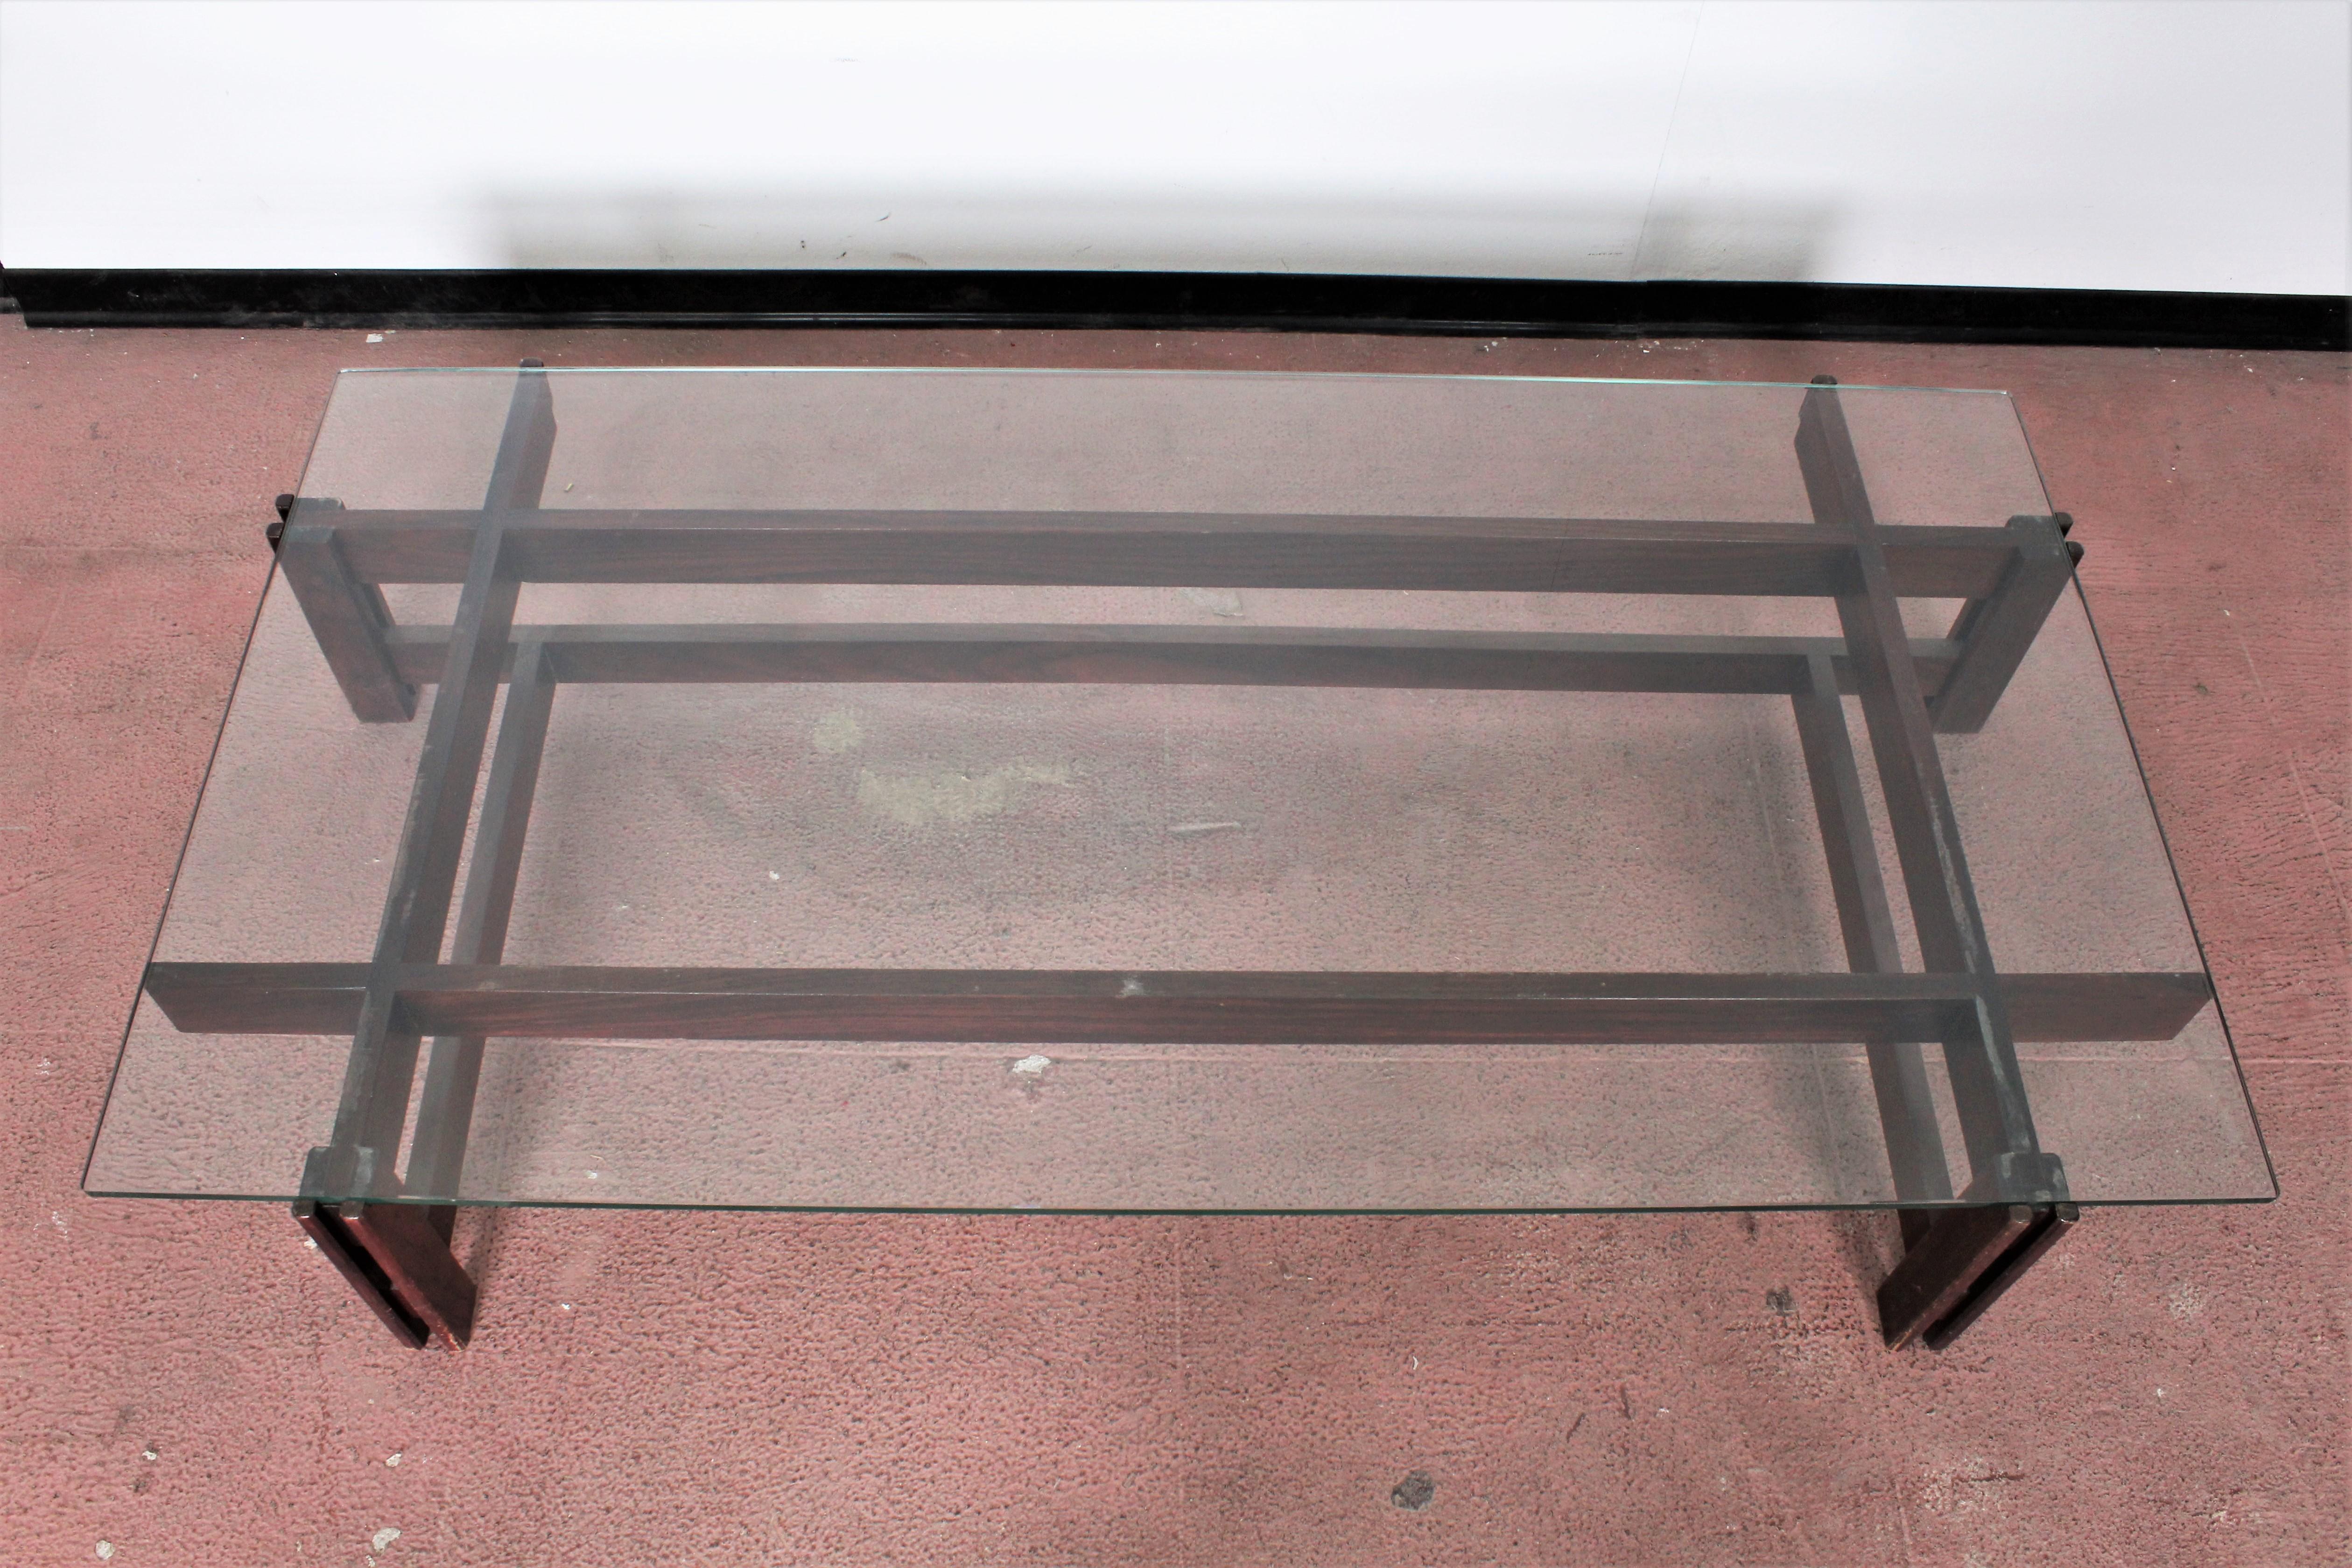 Italian Midcentury Ico Parisi for Cassina Wood and Glass Coffee Table mod.751 , 60s Italy